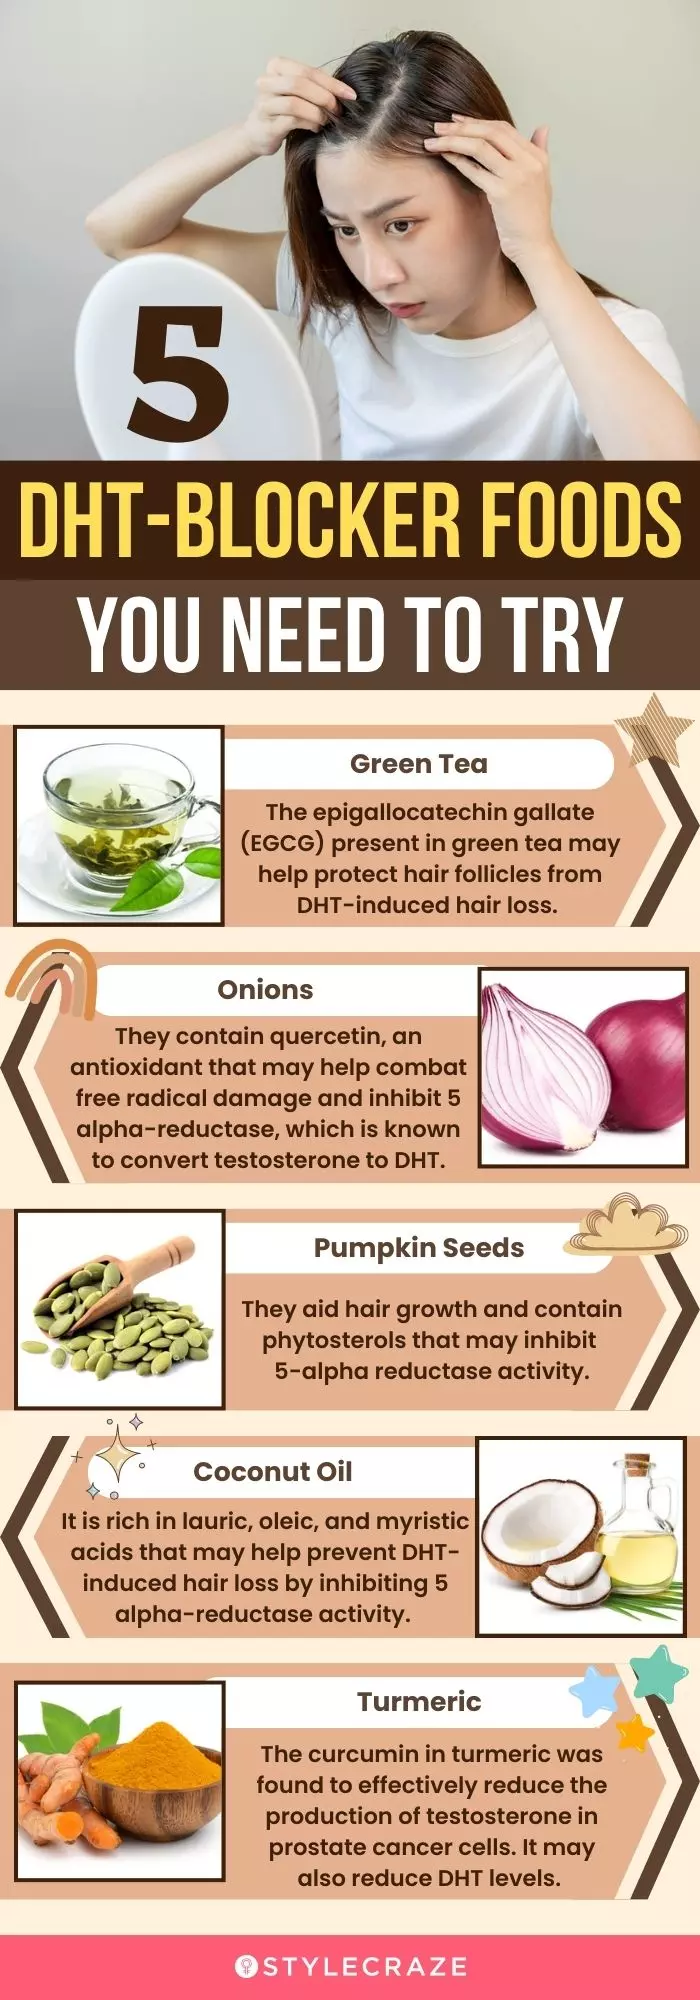 5 dht-blocker foods you need to try (infographic)